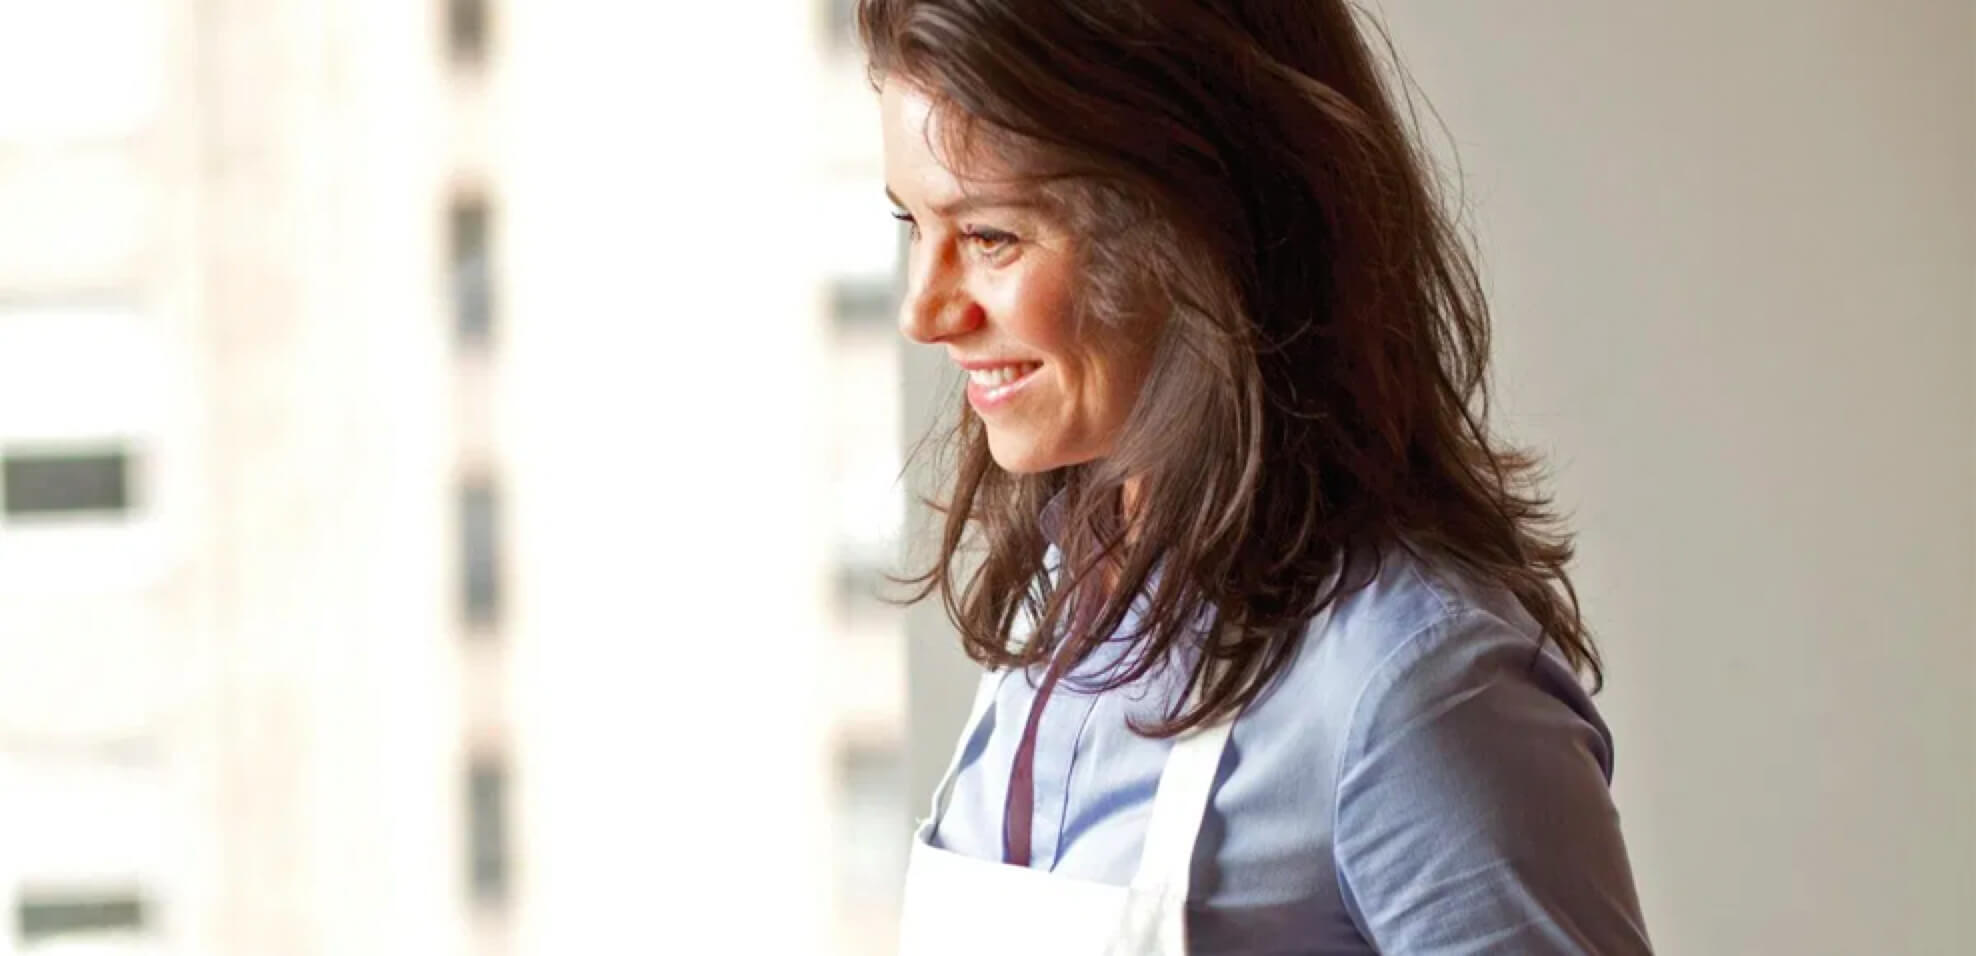 Katie Workman smiling and wearing a blue shirt and a white apron.